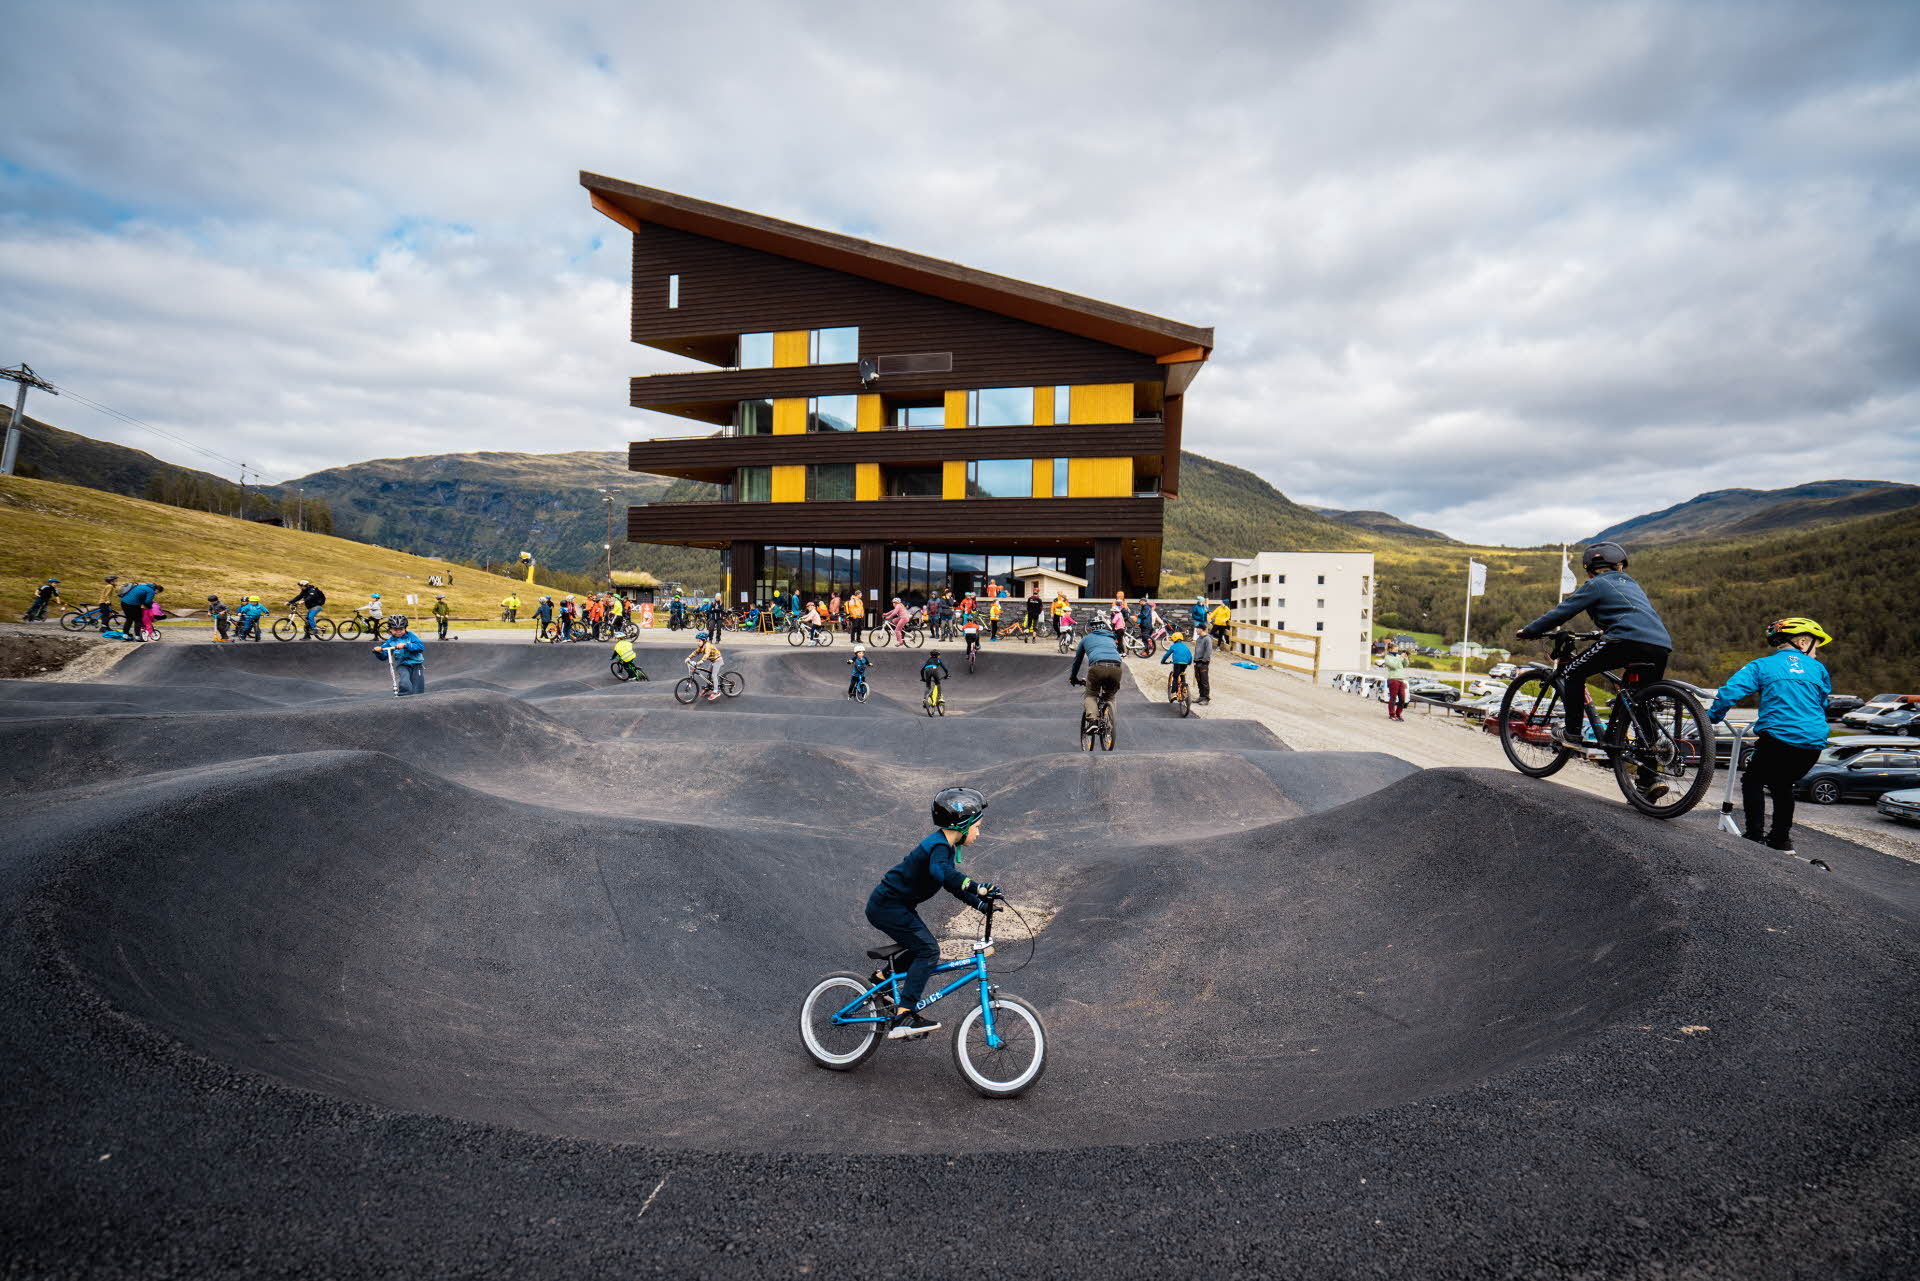 Children and adults cycle on the pumptrack outside the Myrkdalen Hotel